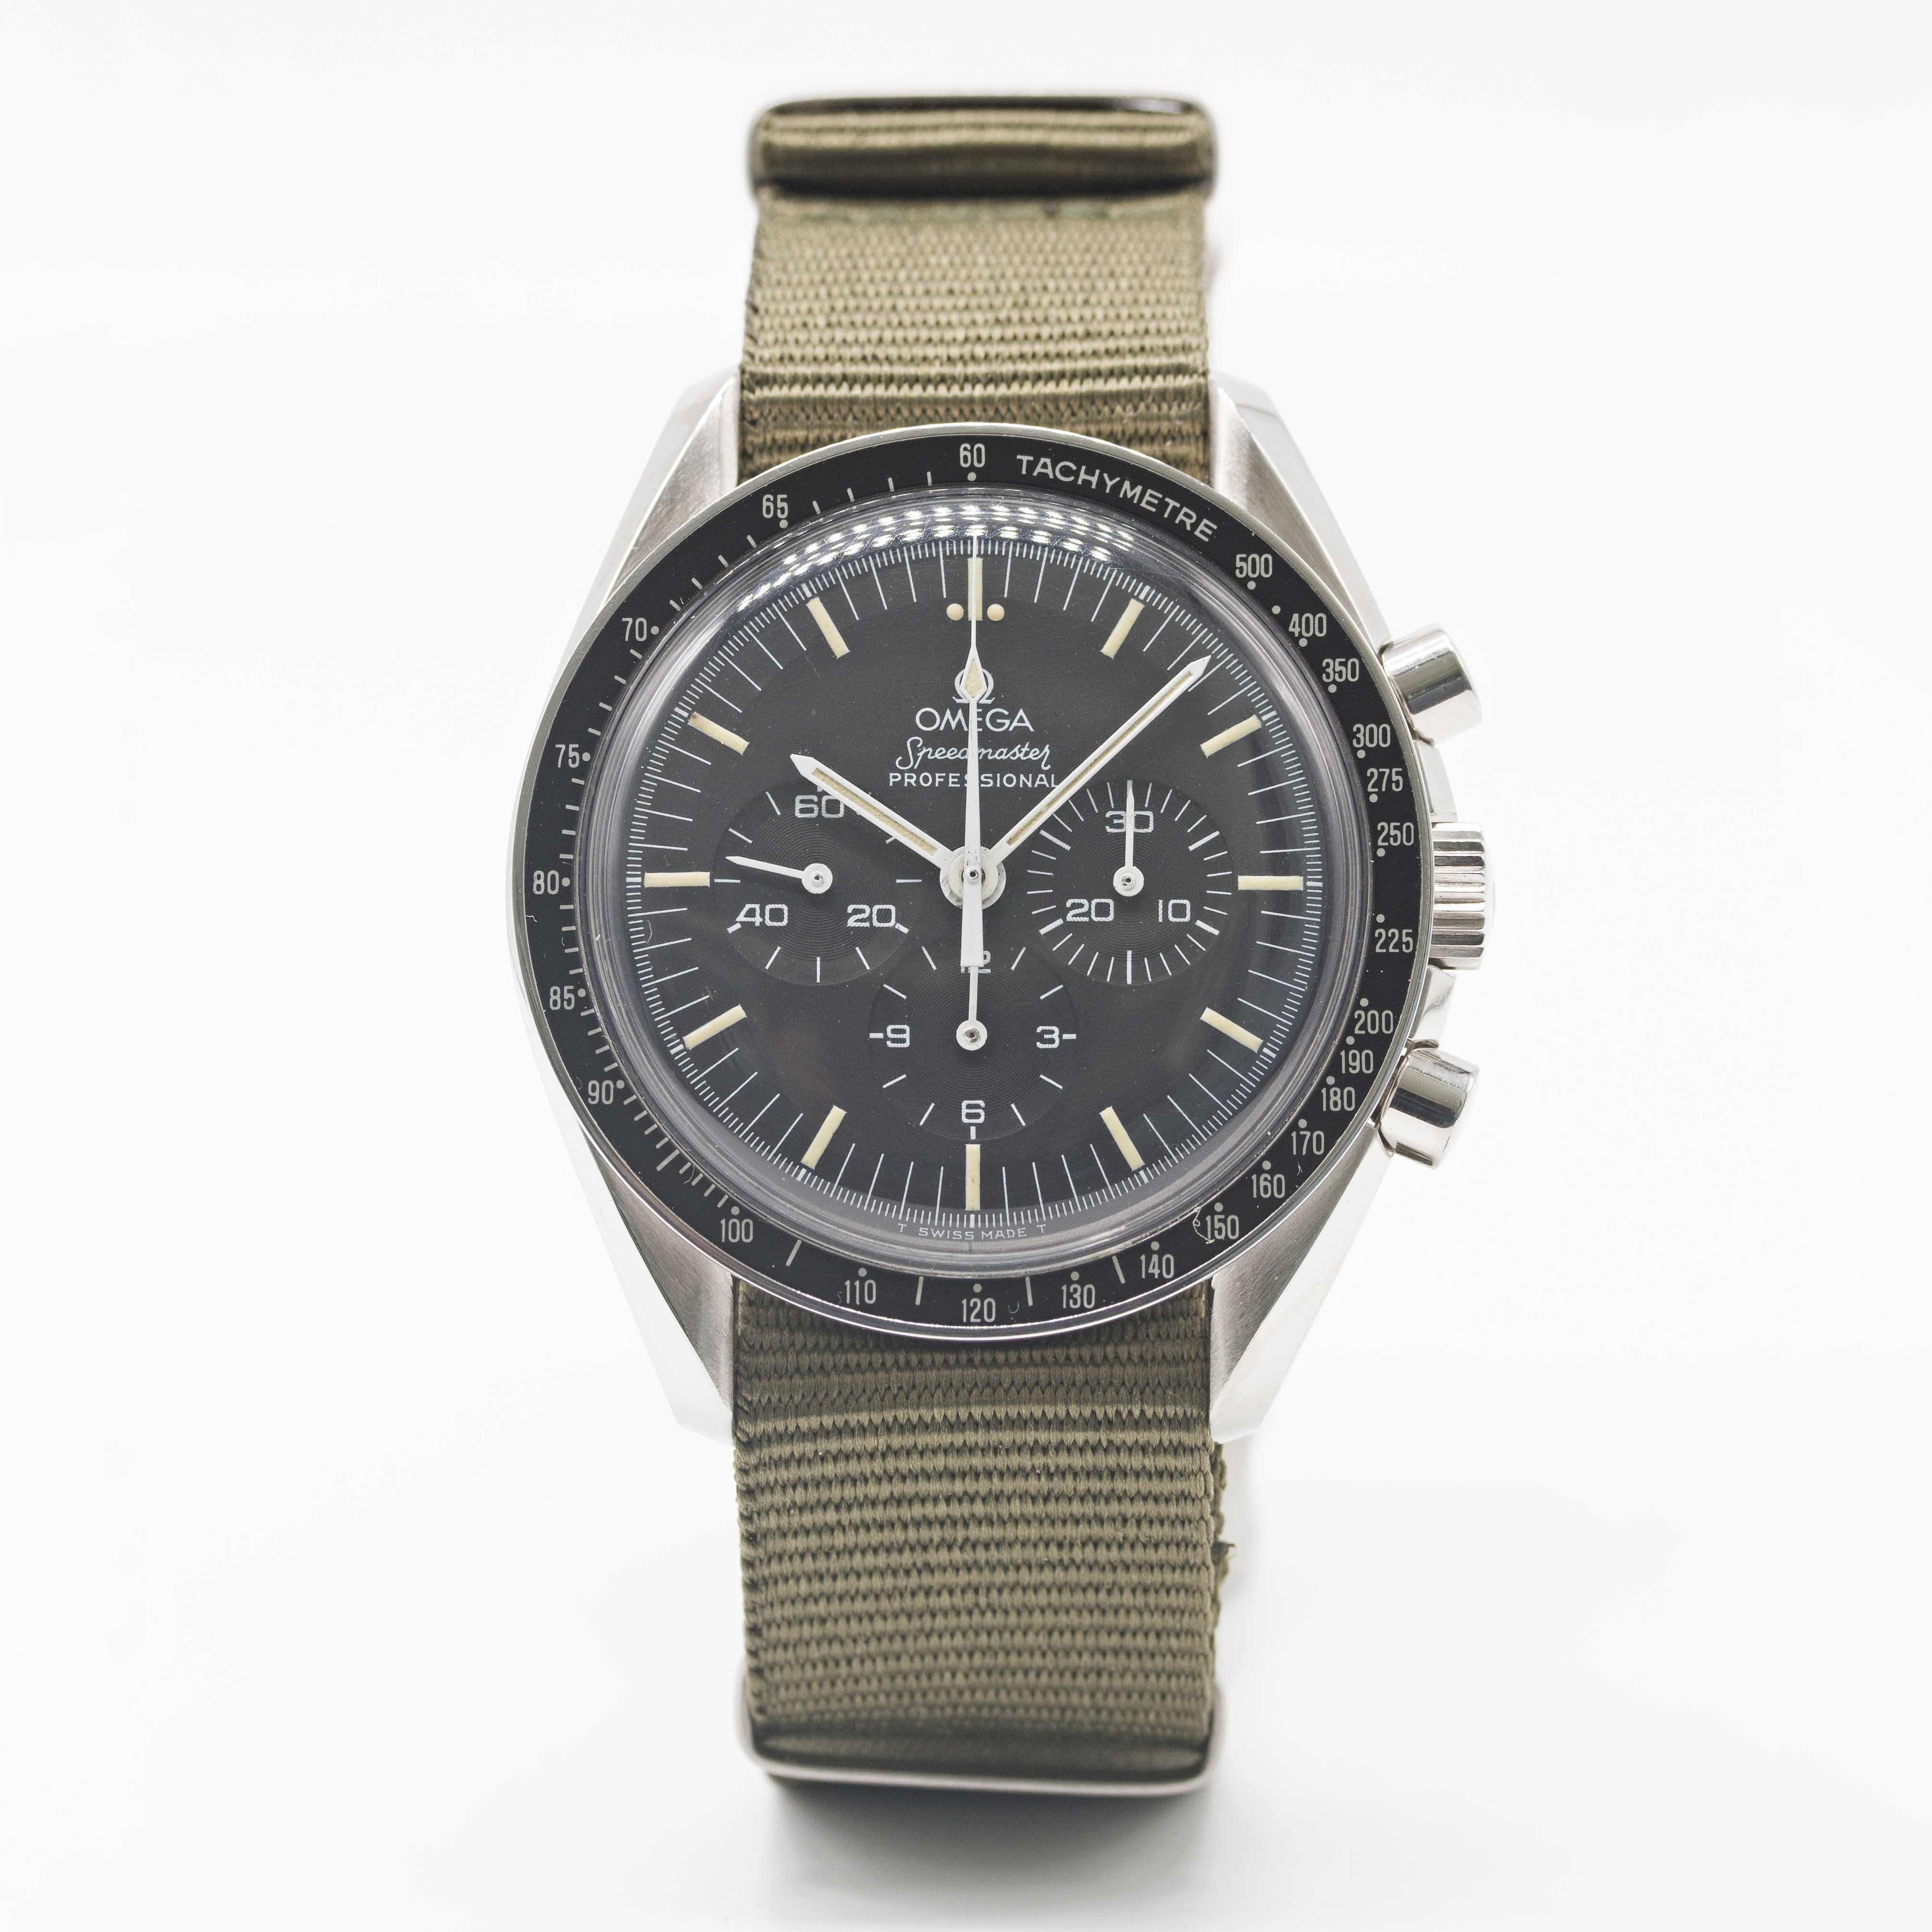 A GENTLEMAN'S STAINLESS STEEL OMEGA SPEEDMASTER PROFESSIONAL CHRONOGRAPH WRIST WATCH CIRCA 1990, - Image 2 of 6